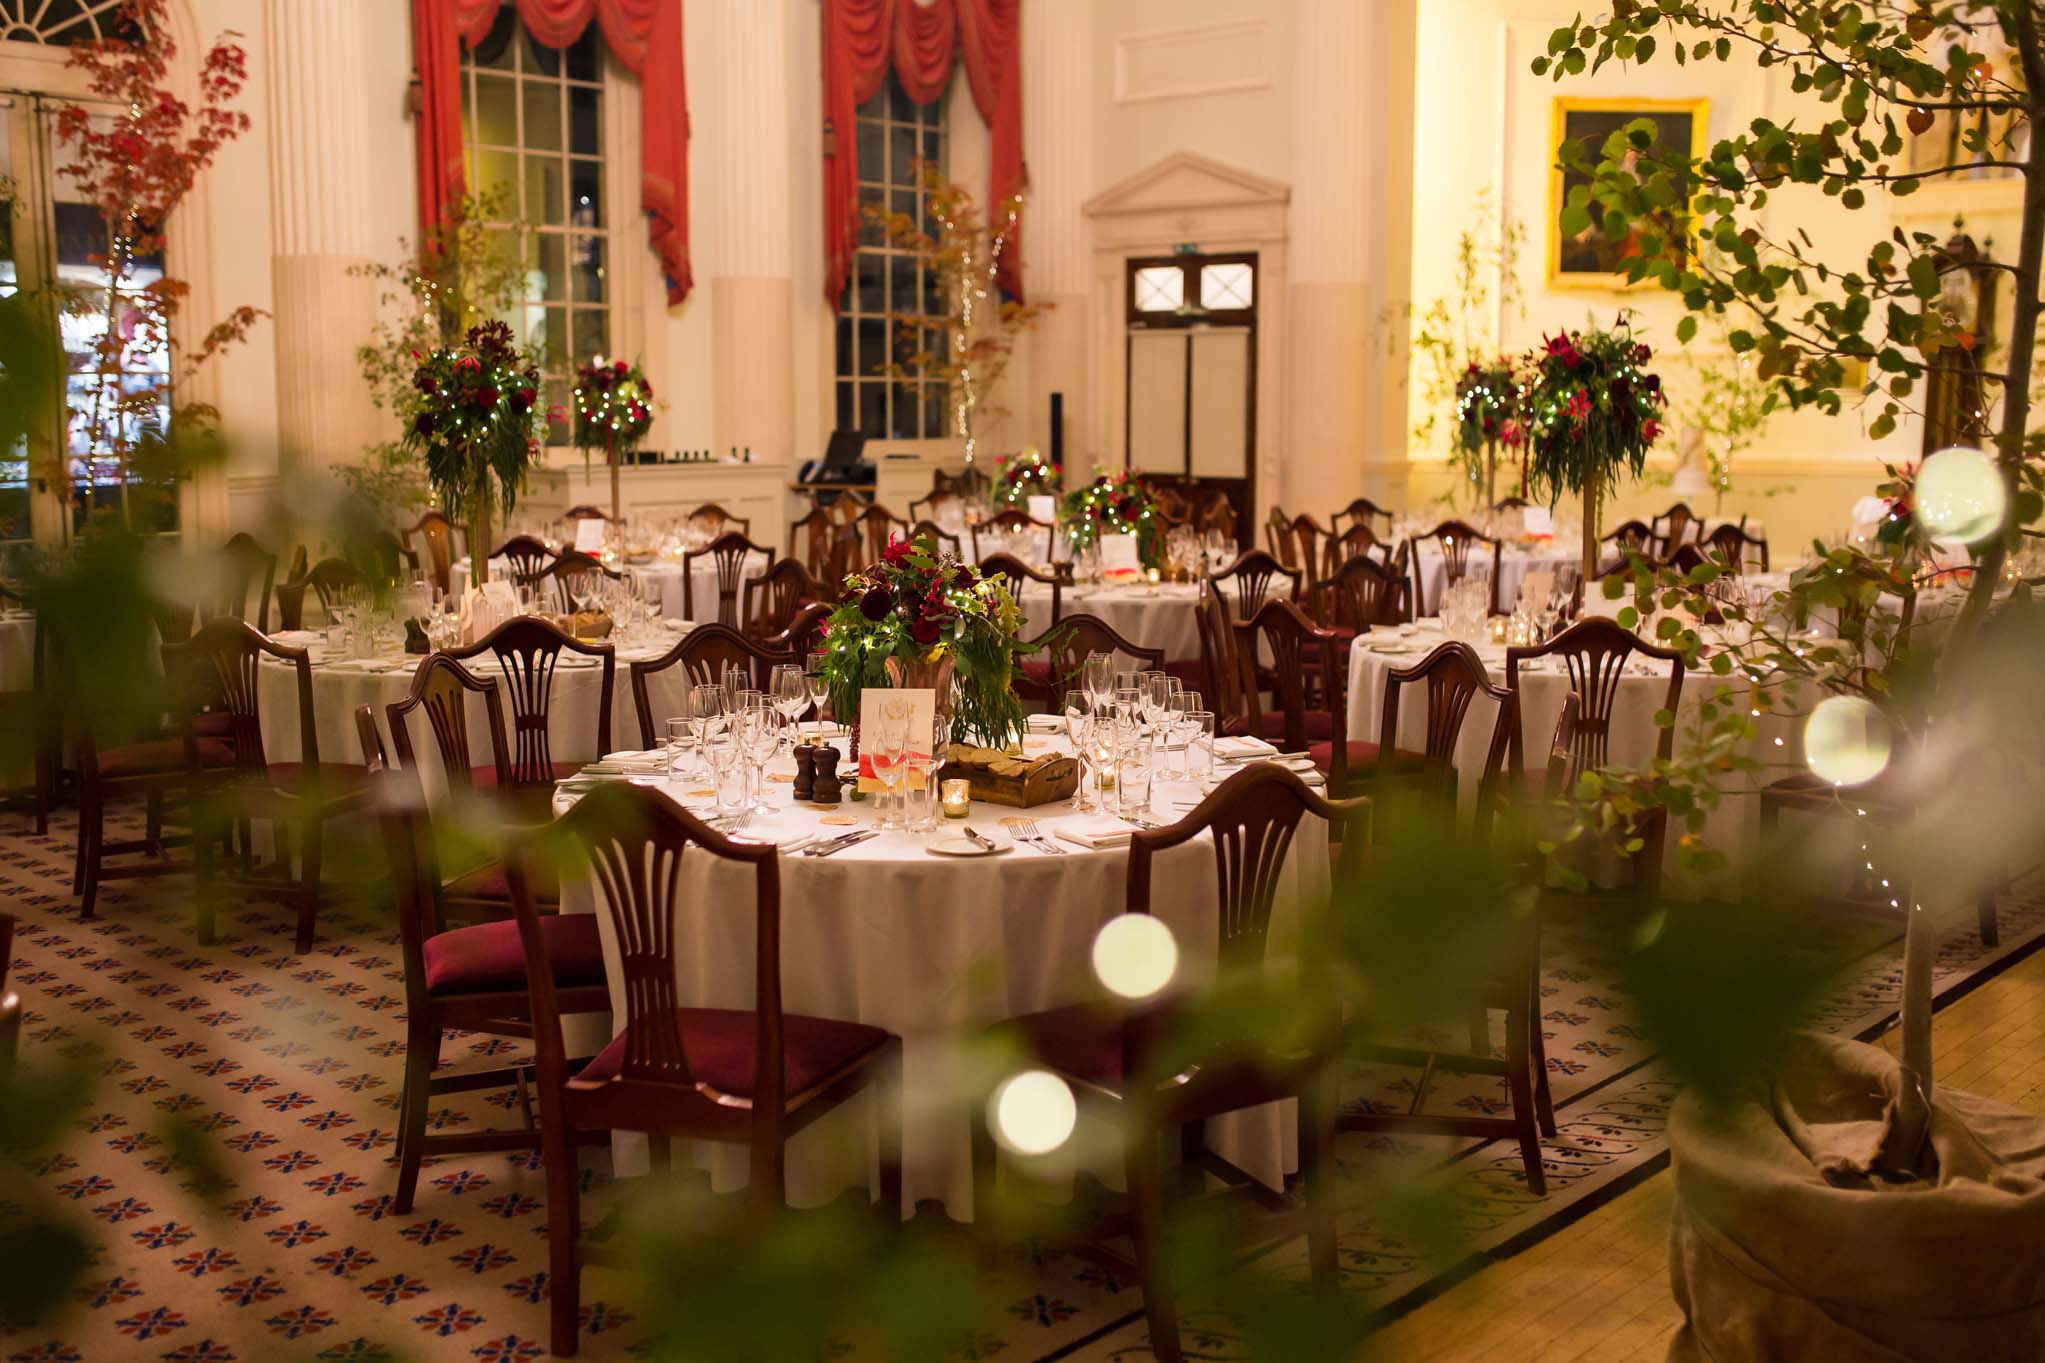 Pump Room wedding reception, decorated with trees